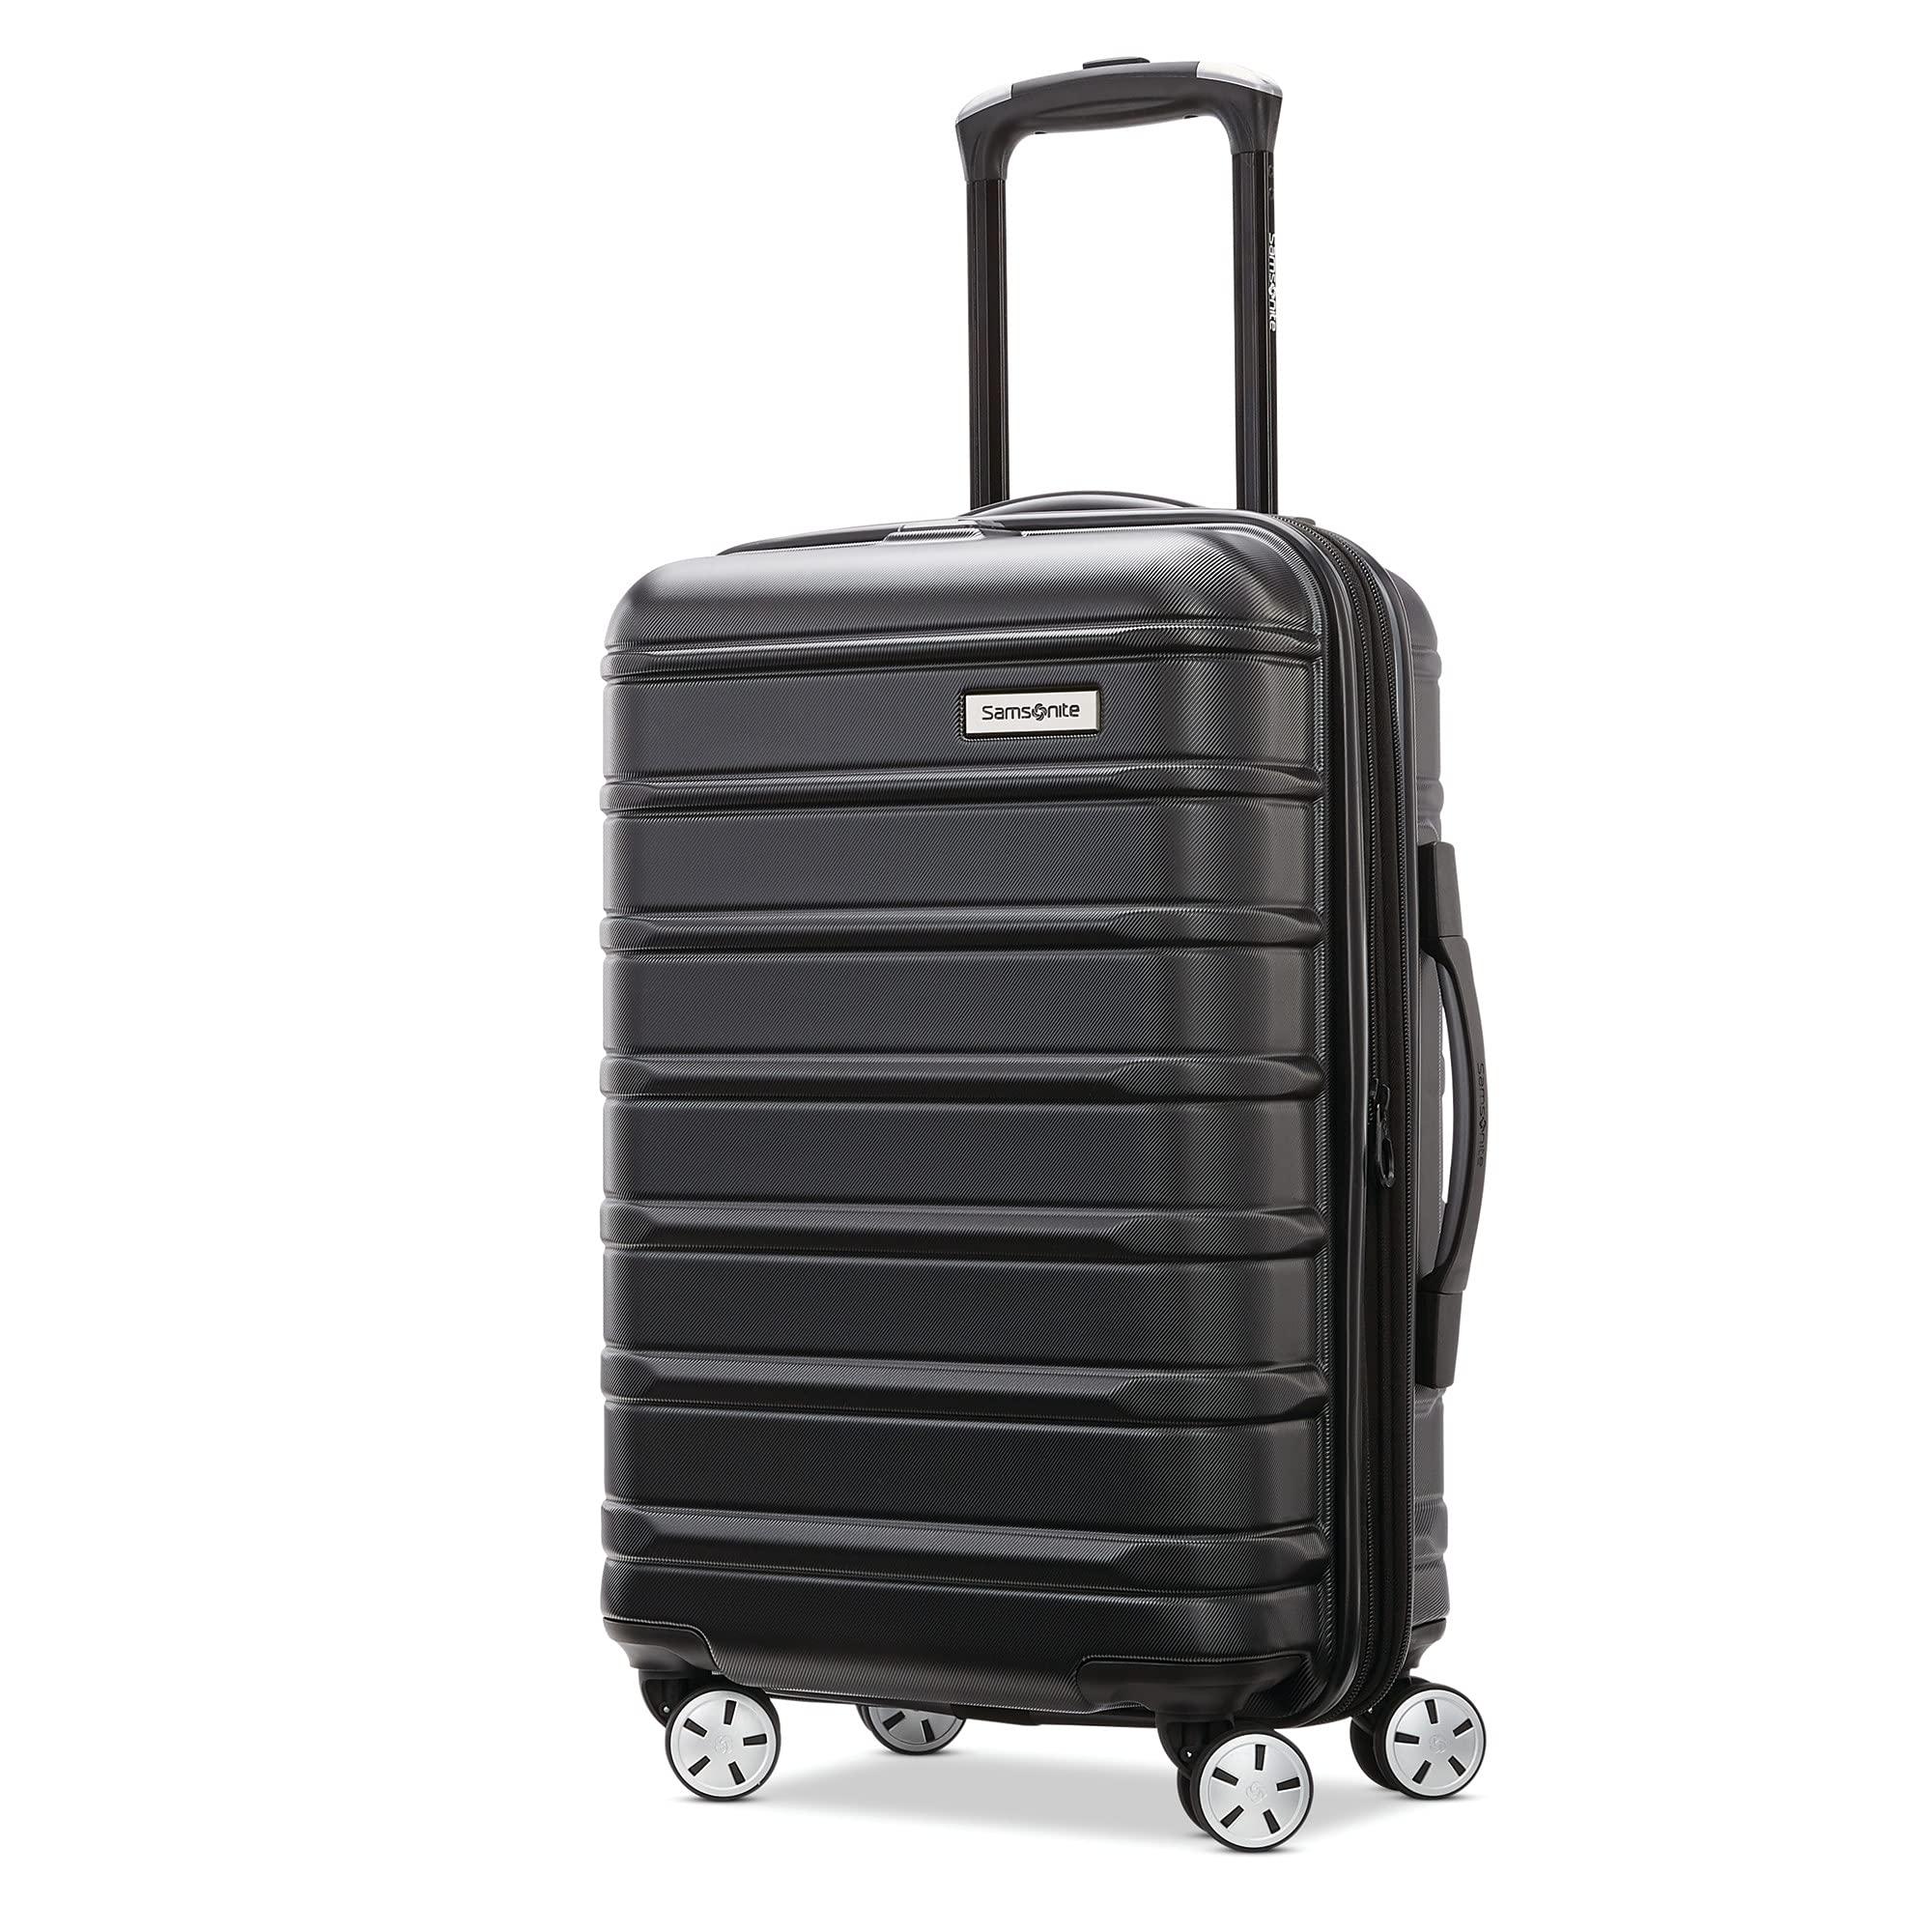 Samsonite Centric Hardside Expandable Luggage With Spinner Wheels in Black Womens Luggage and suitcases Samsonite Luggage and suitcases Save 70% 